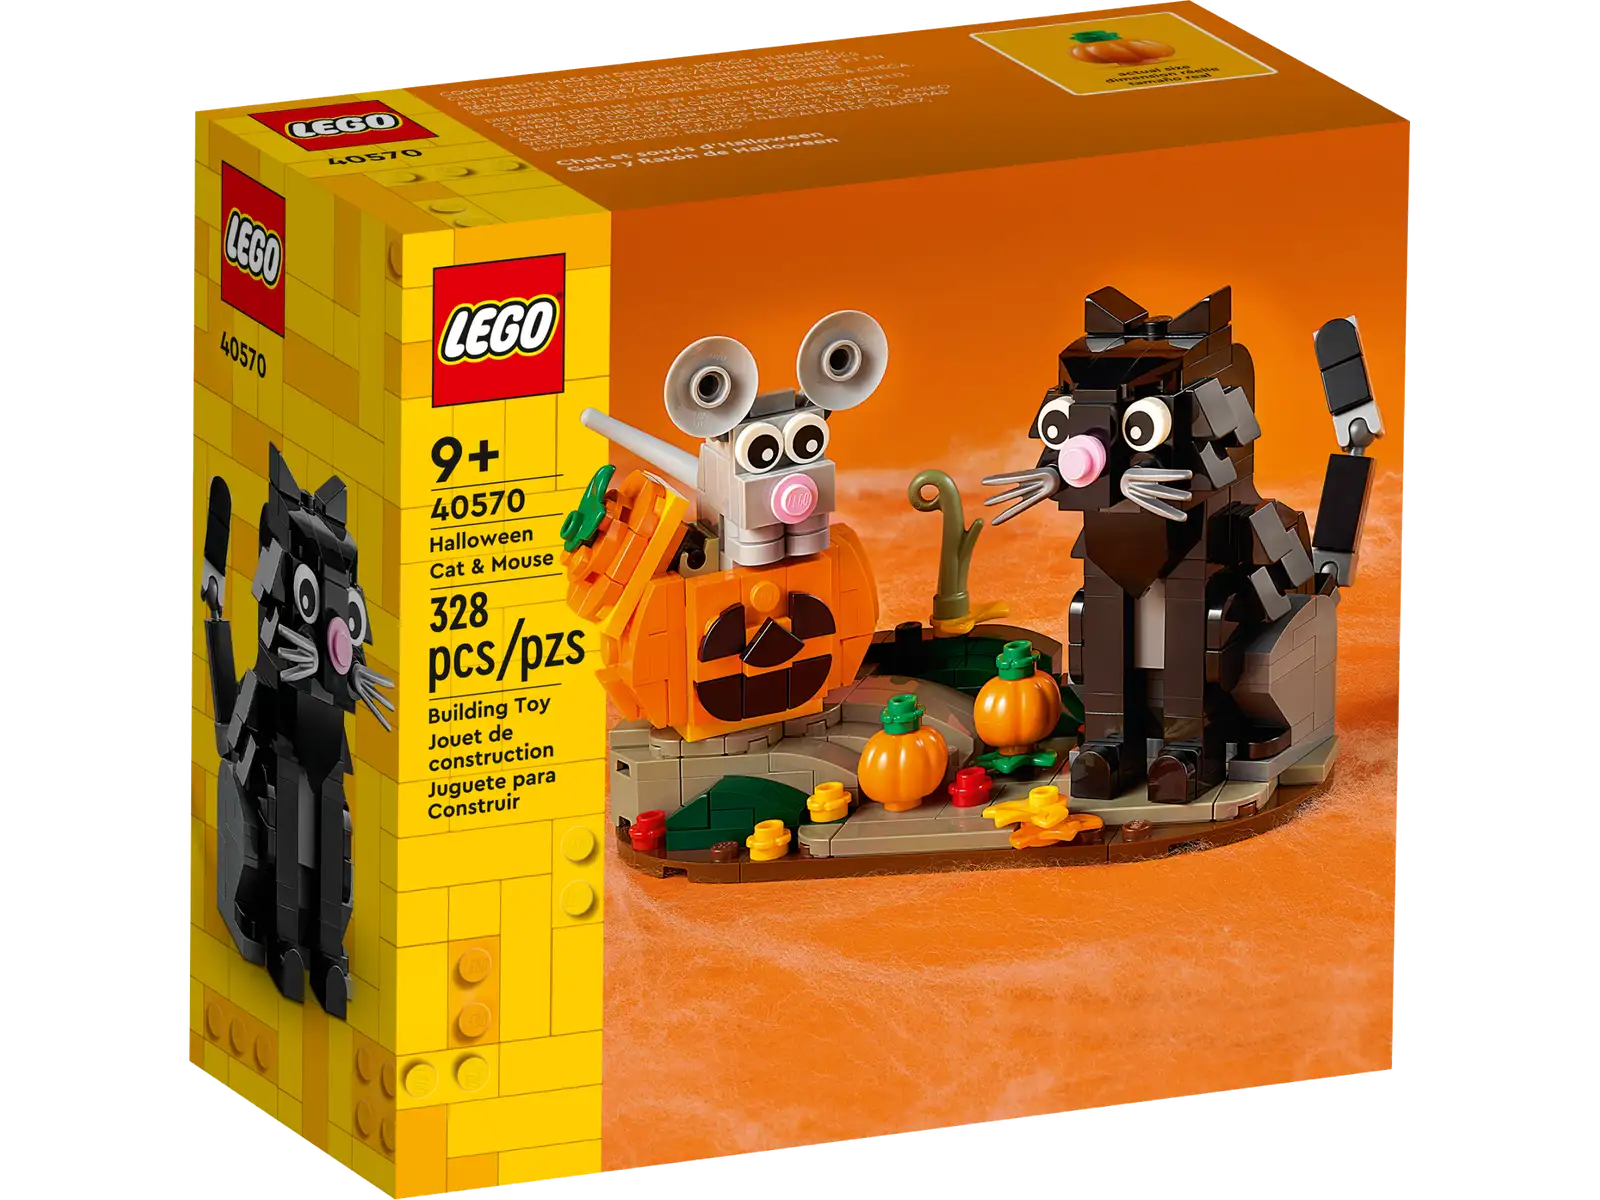 LEGO 40570 Halloween Cat & Mouse